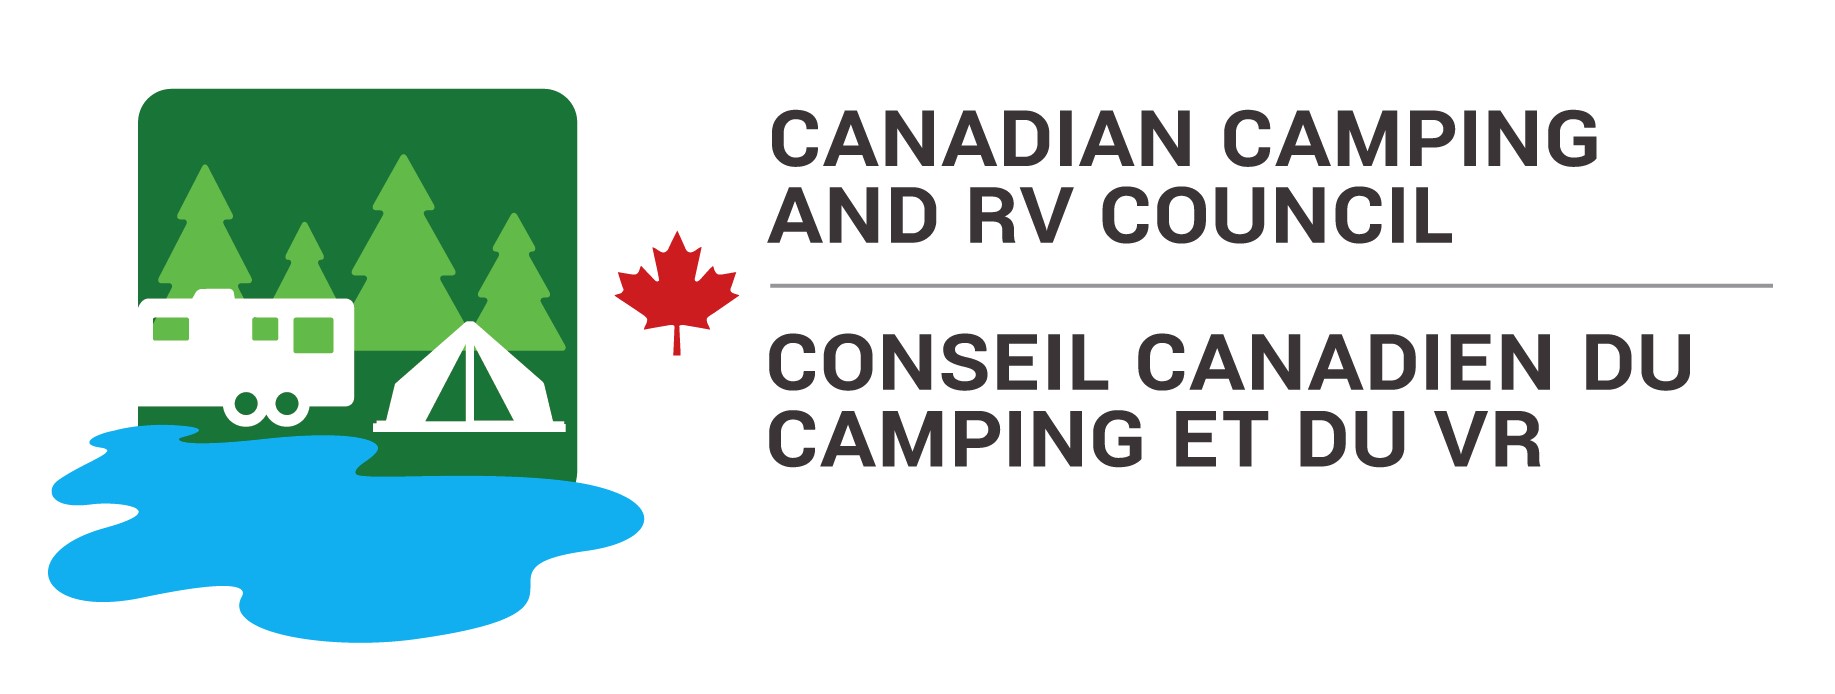 Canadian Camping and RV Council Logo